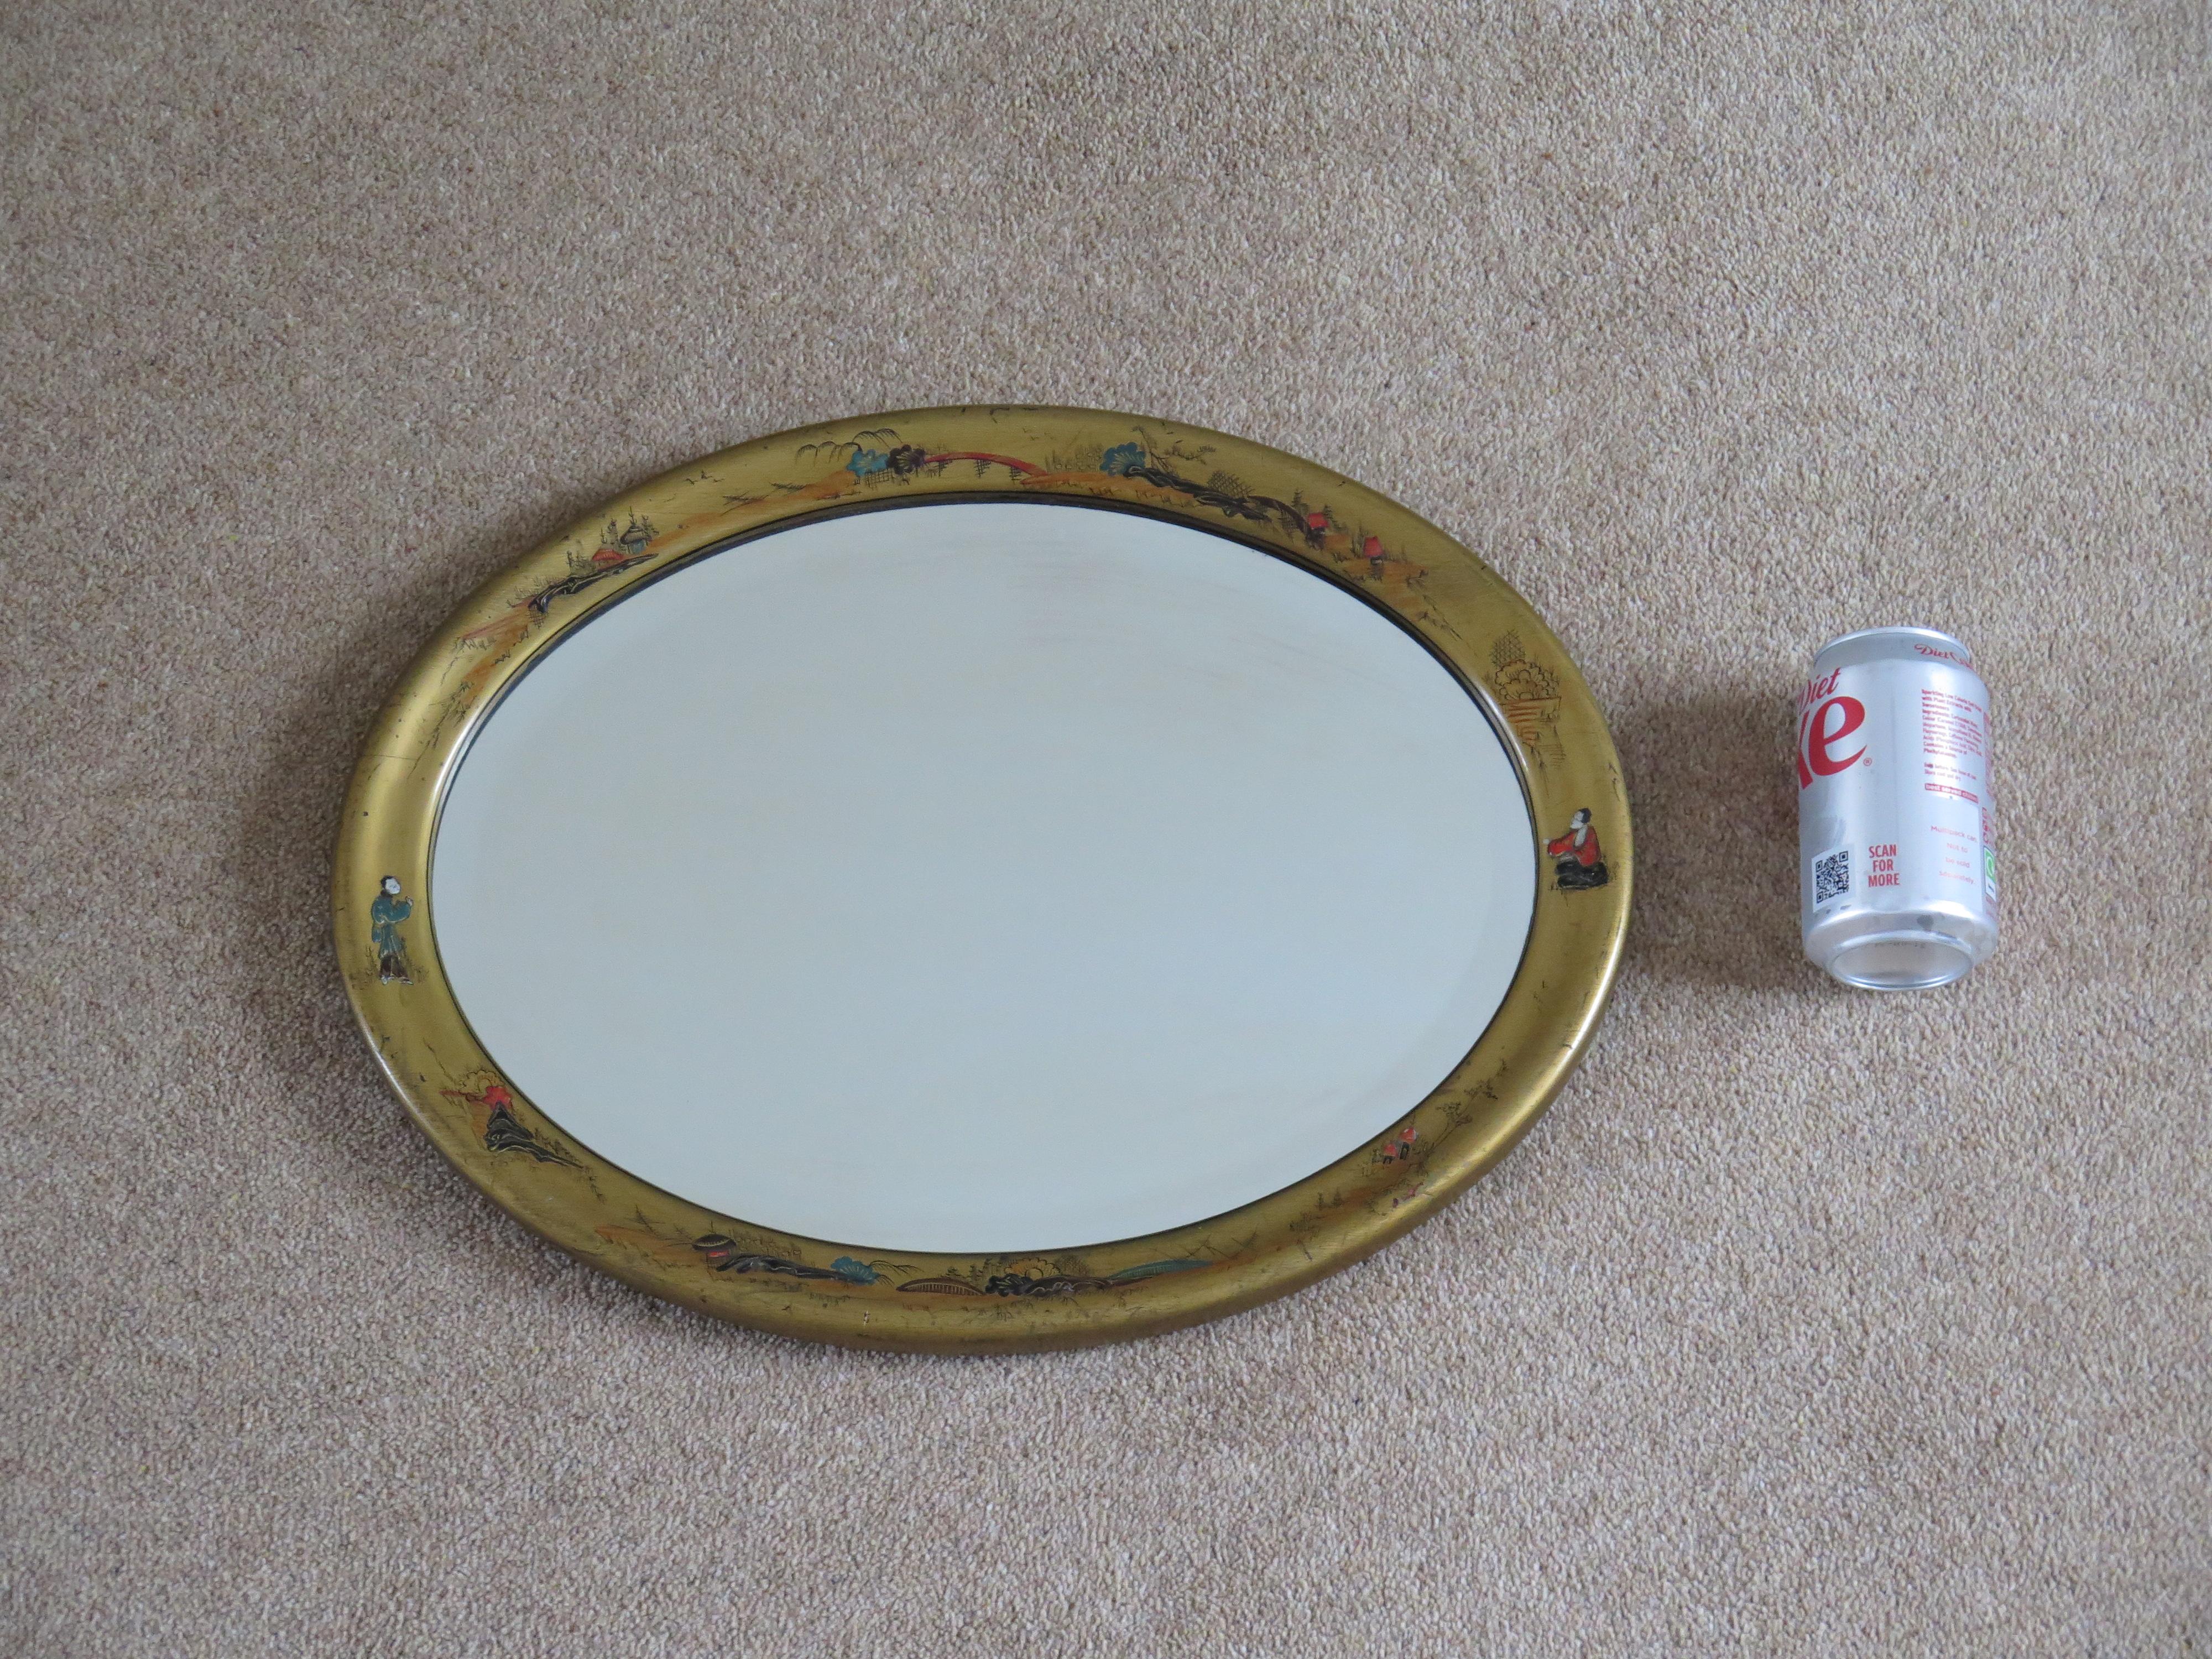 Oval Edwardian Gilt Chinoiserie Wall Mirror Bevelled Glass, English circa 1900 For Sale 12